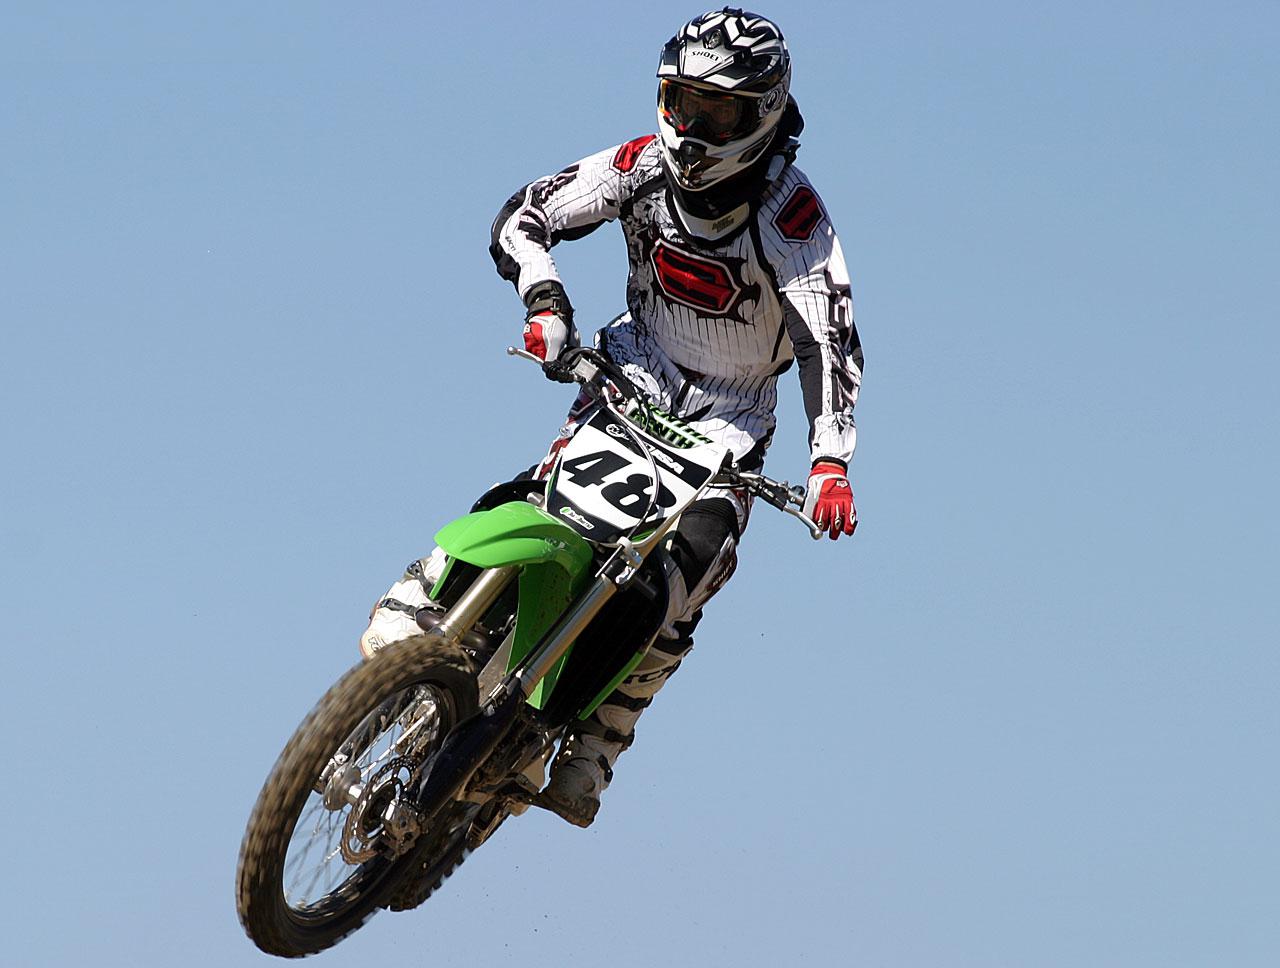 Download High quality Motocross wallpaper / Sports / 1280x968